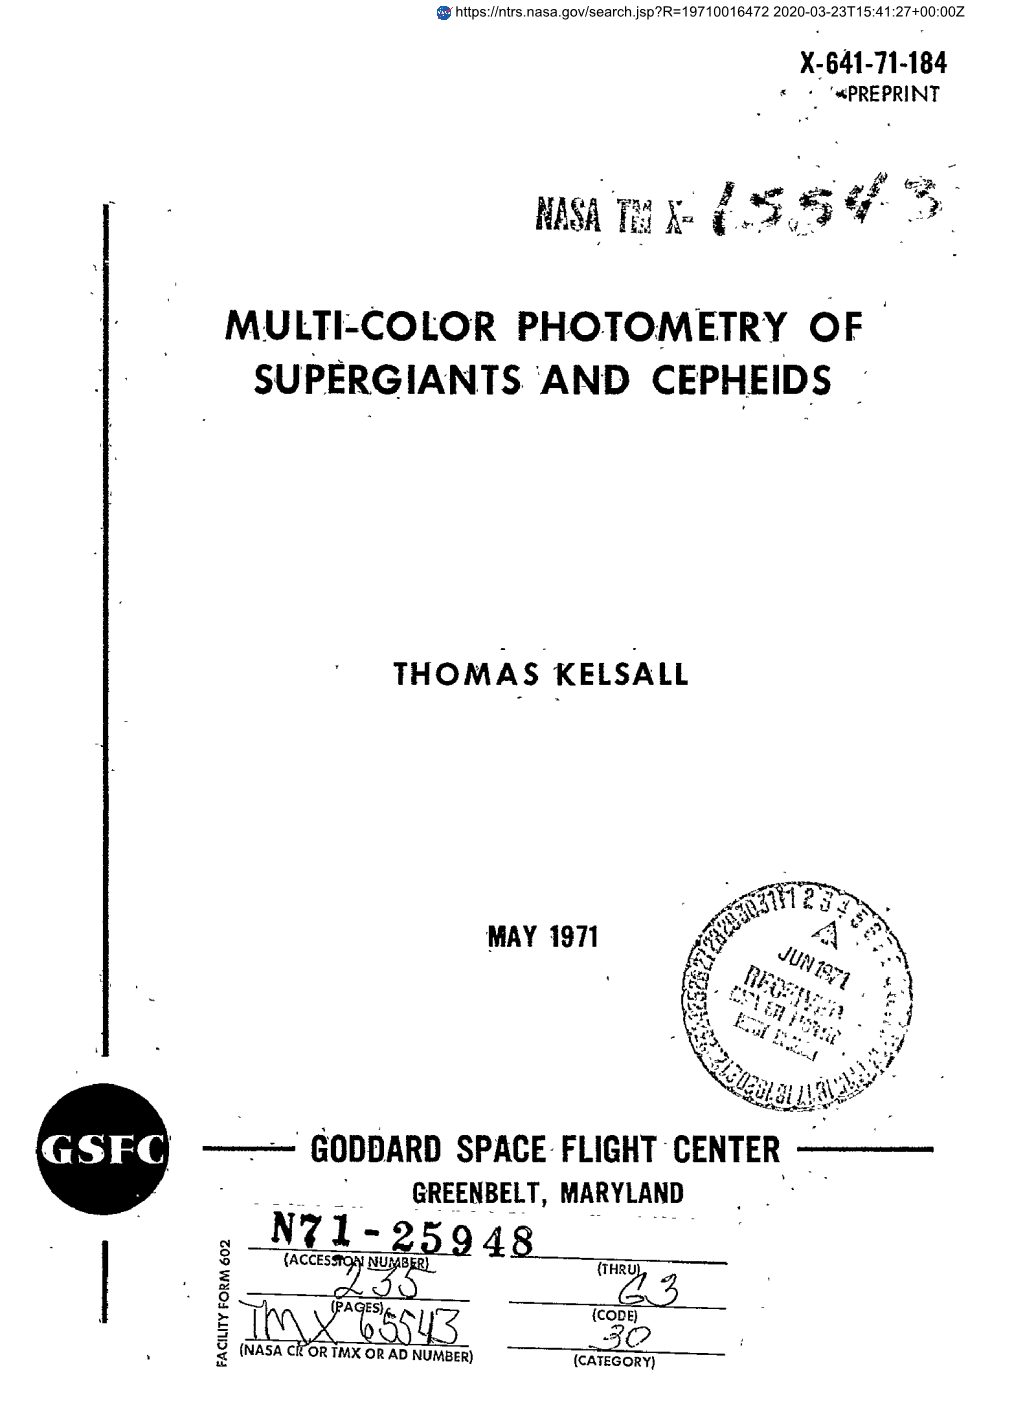 Multi-Color Photometry of Supergiants and Cepheids